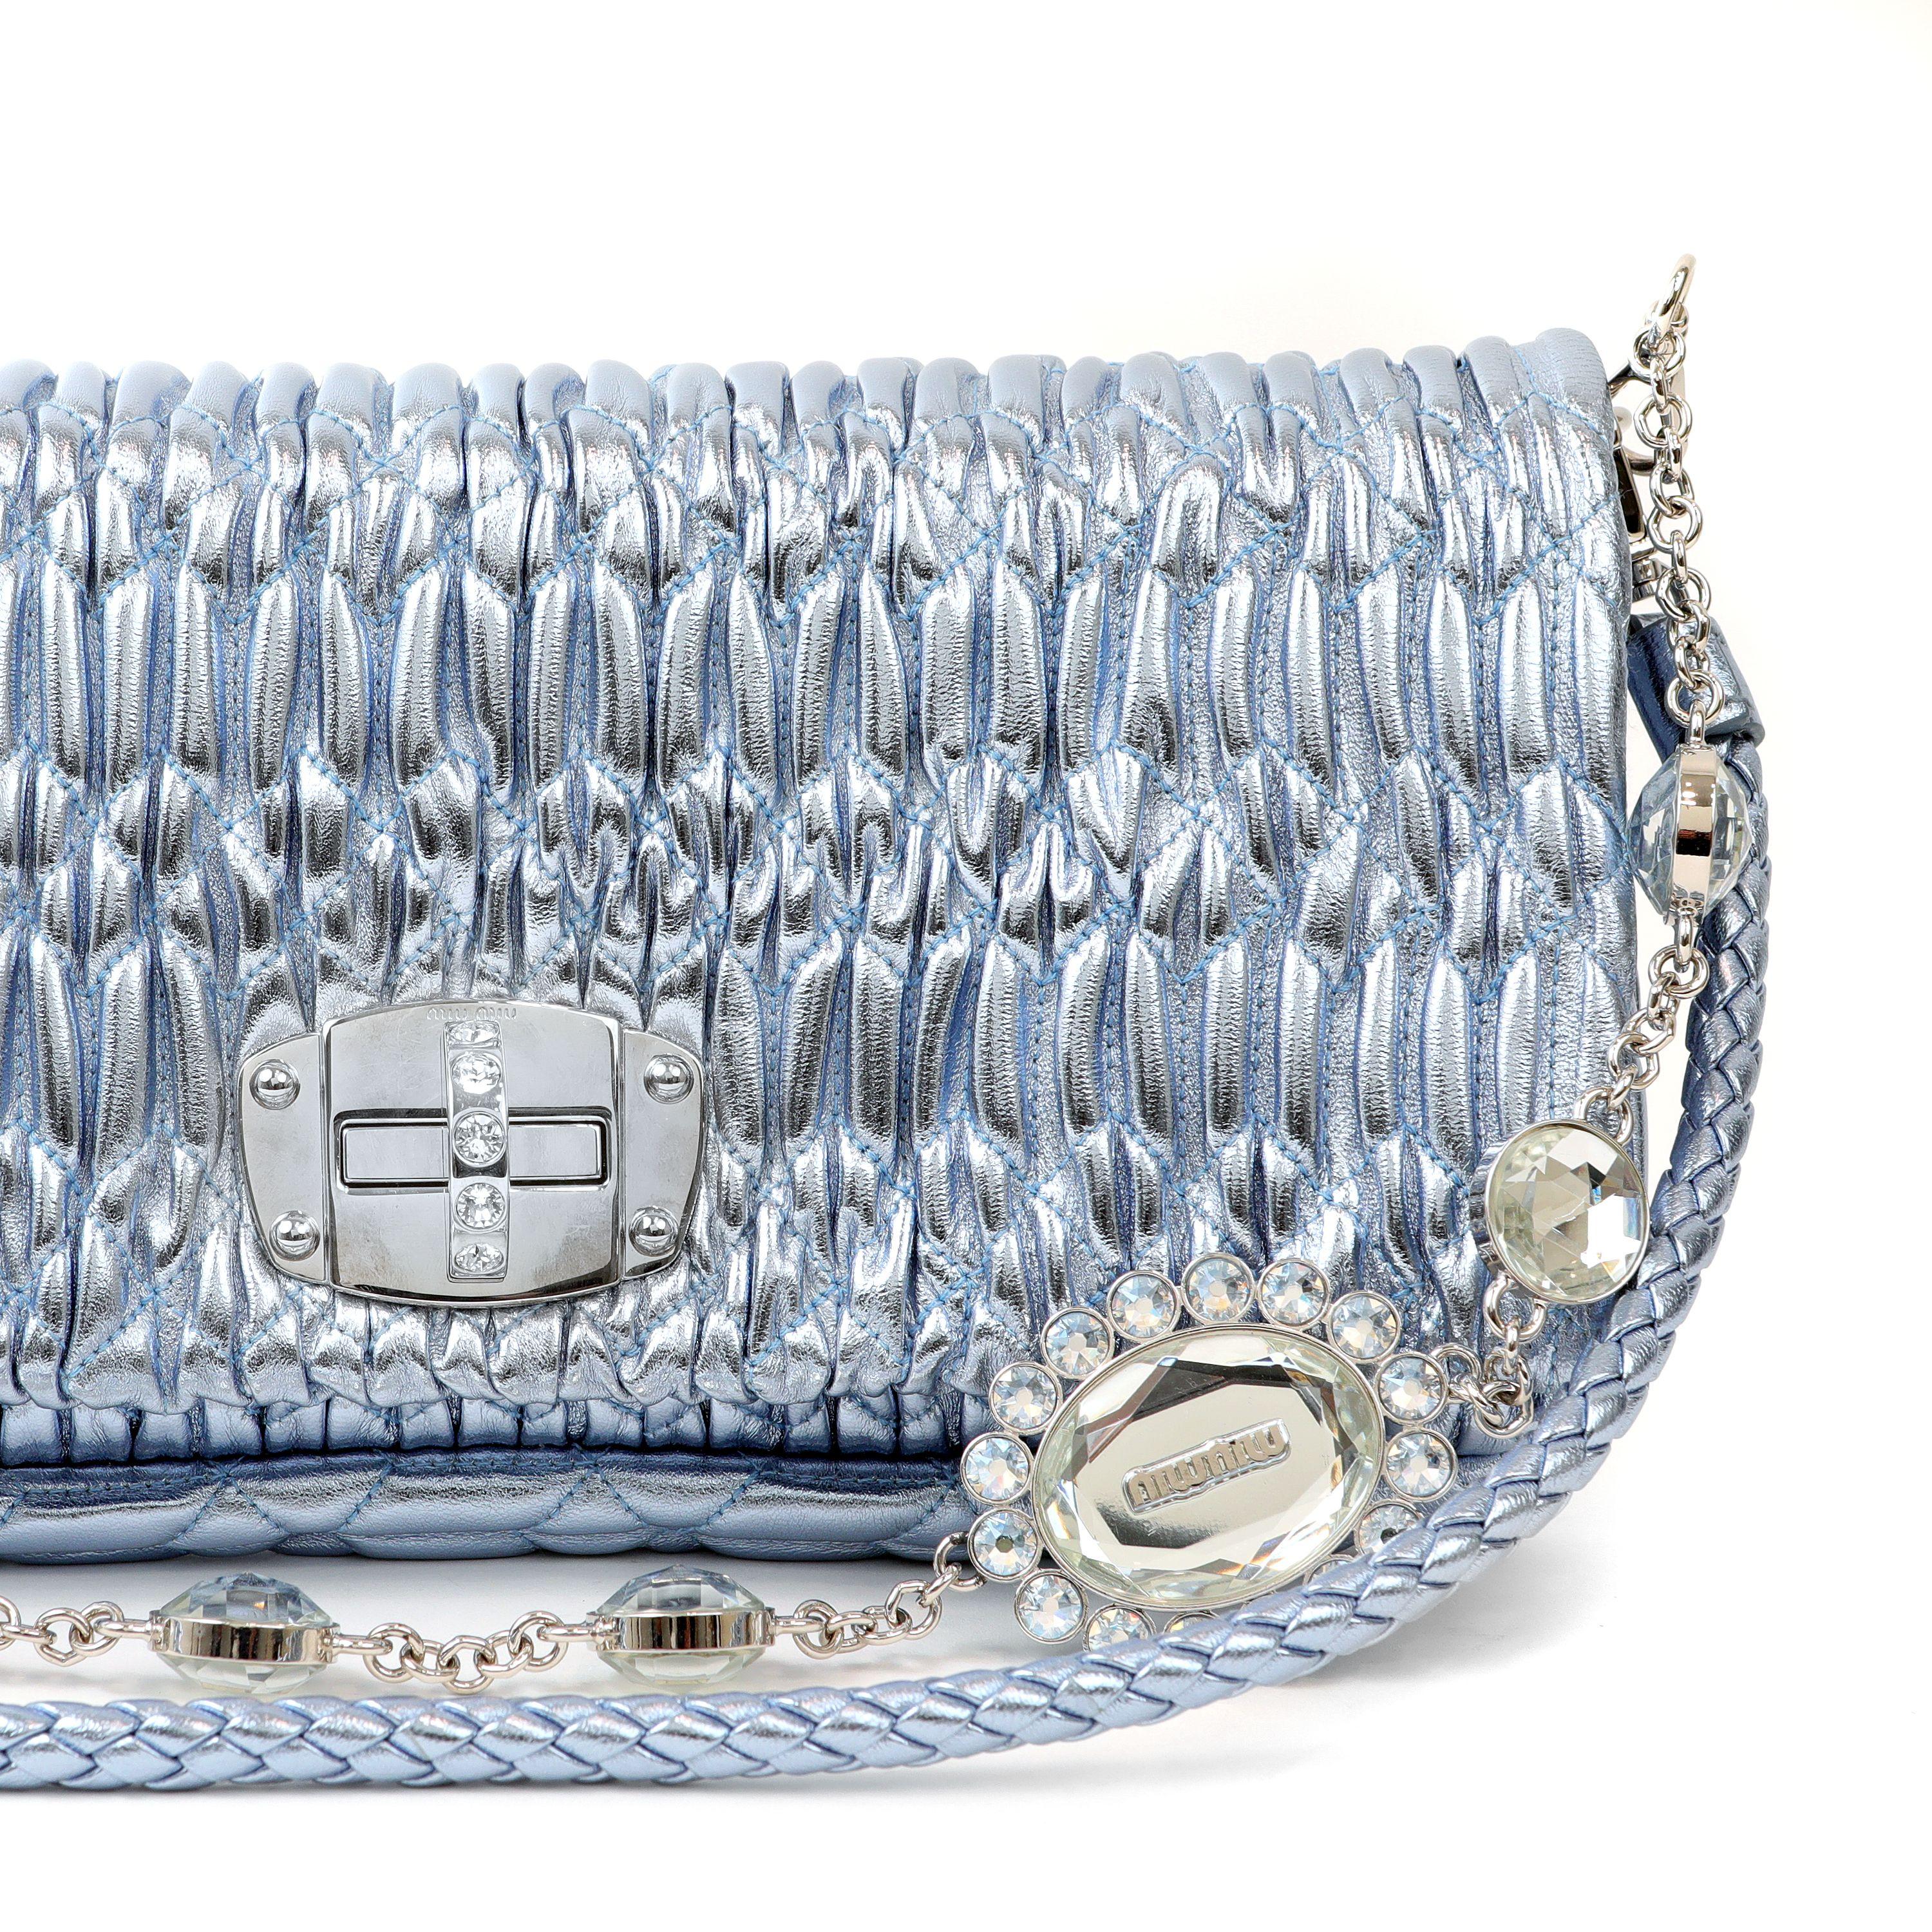 This authentic Miu Miu Metallic Blue Crystal Cloquè Small Bag is in pristine condition.  The iconic design features frosty blue raised quilted Nappa leather with silver and crystal turn lock closure.  May be carried by the detachable leather strap